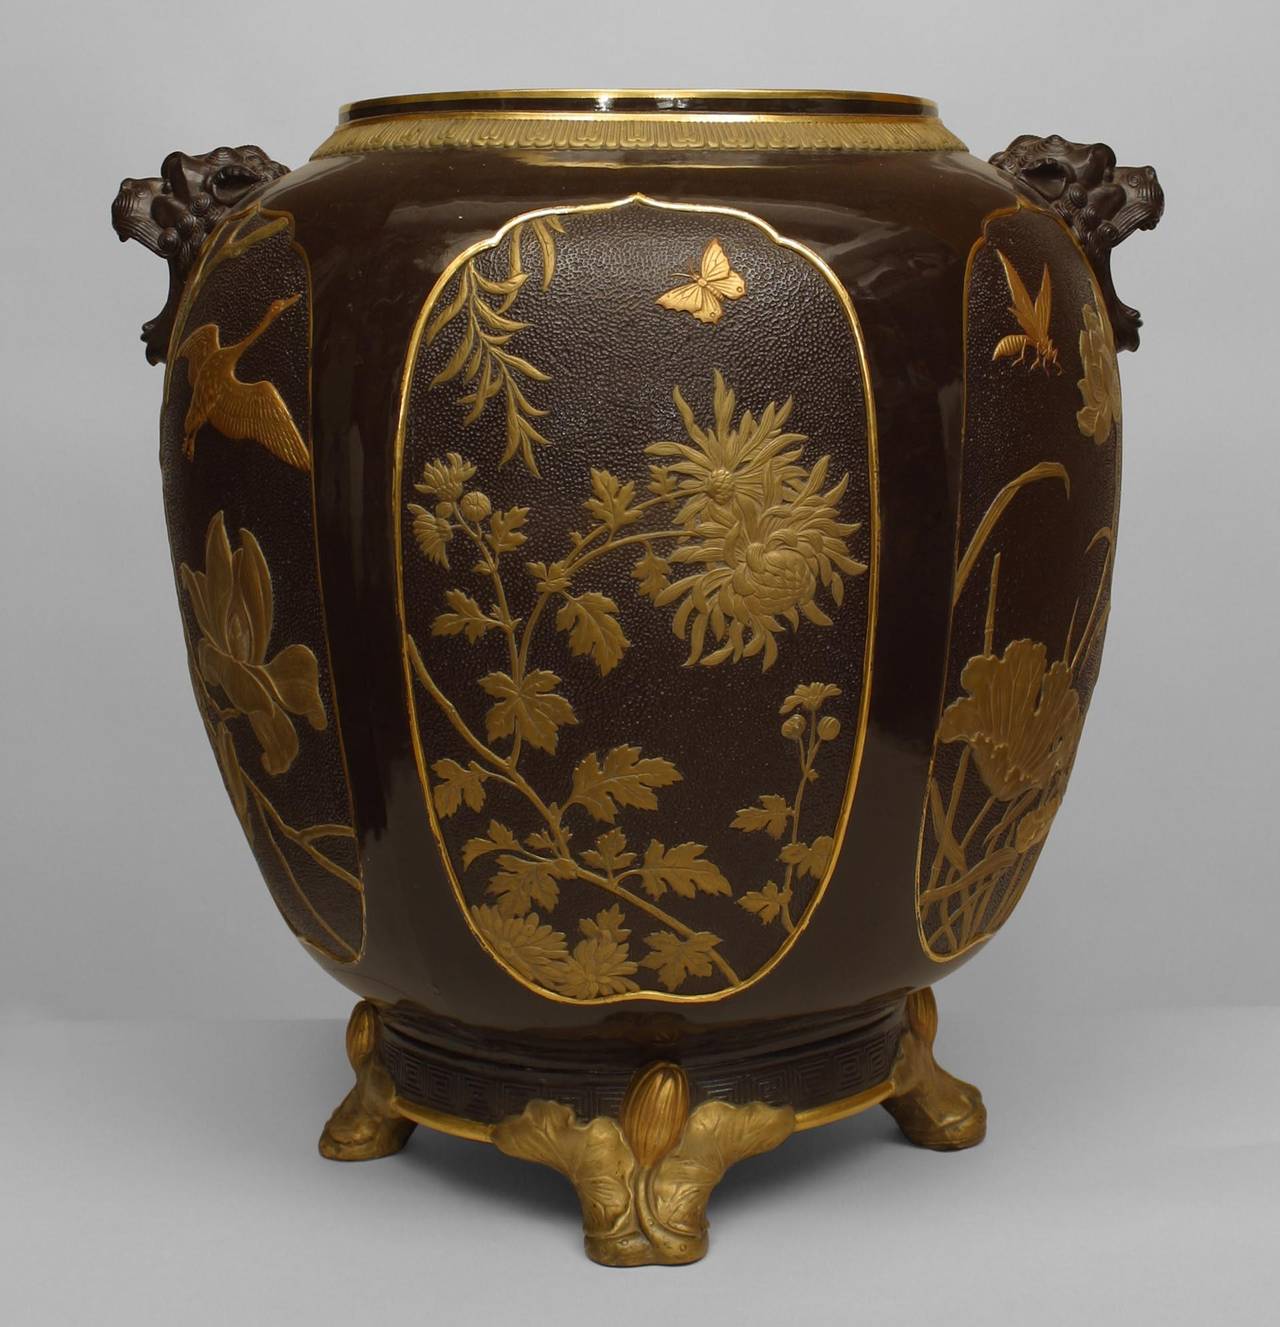 19th century English Regency style brown porcelain jardiniere with Chinoiserie
design and gold trim with lion head sides standing on 4 feet (impressed Minton with numbers). (as is- hairline crack to base)